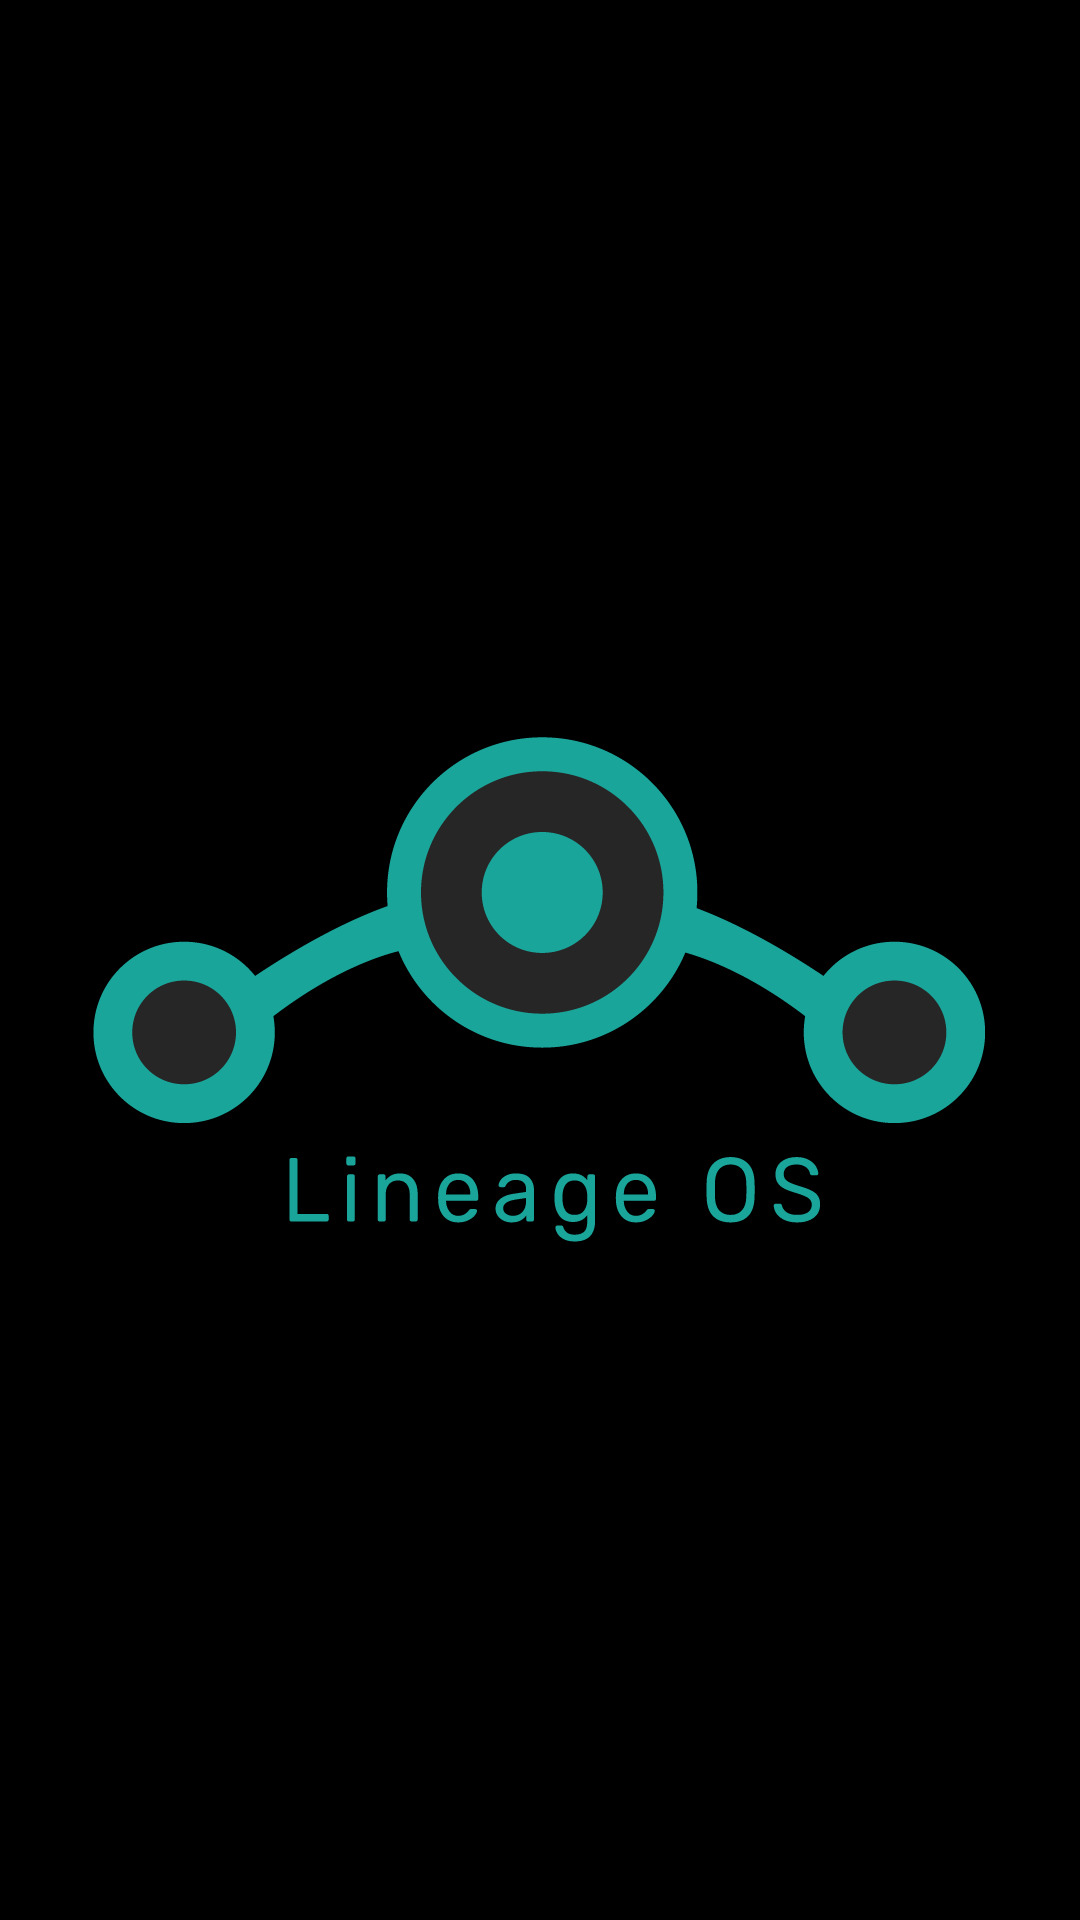 Lineage OS, Android (operating system), Minimalism, Simple background Wallpaper